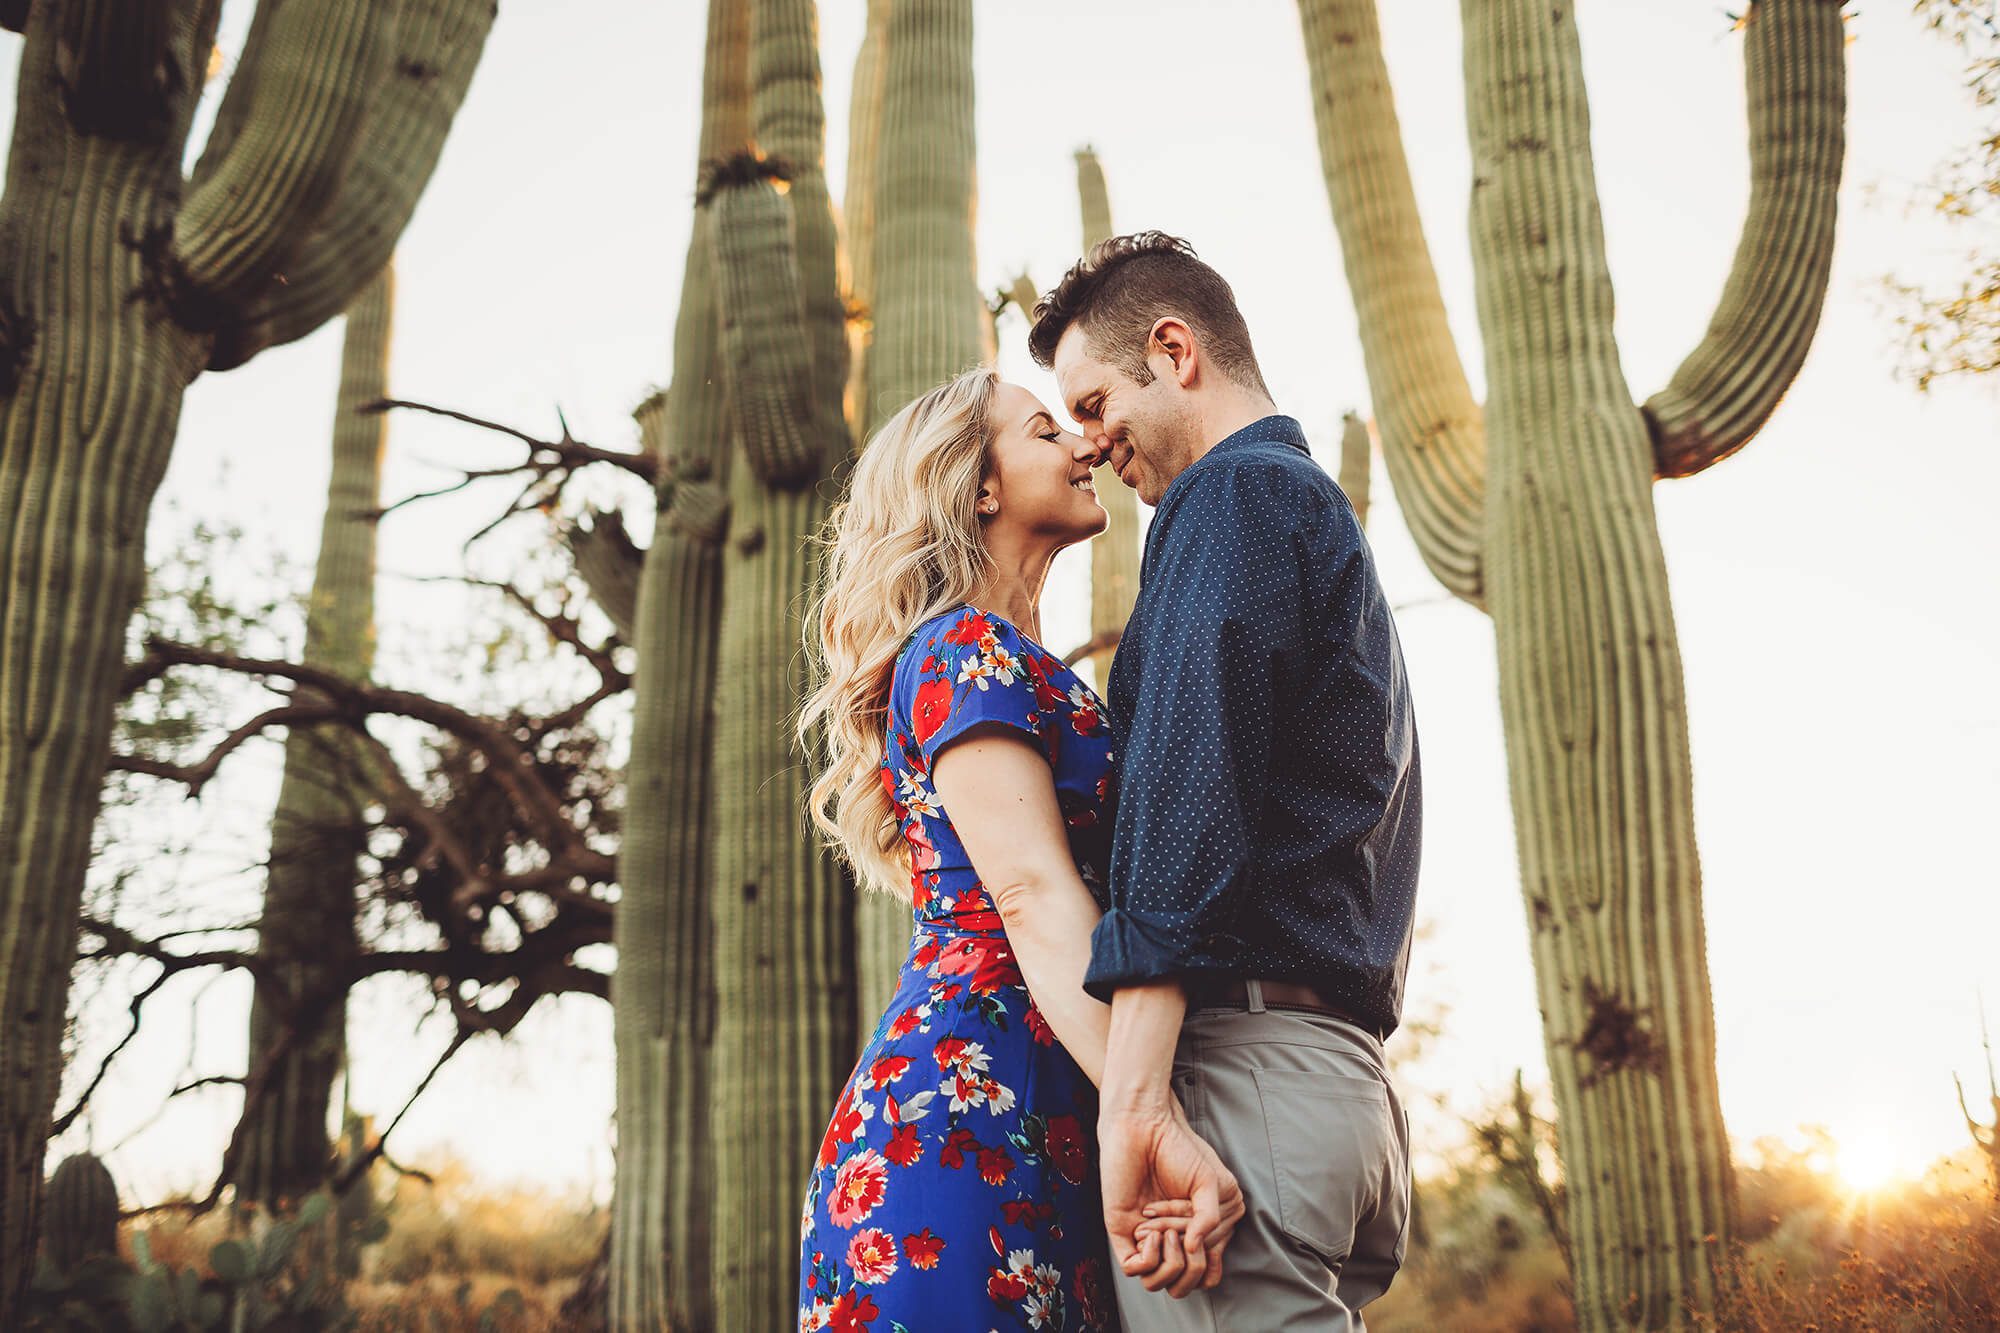 Ally and Shaun hold hands surrounded by towering saguaros during their sunset engagement session